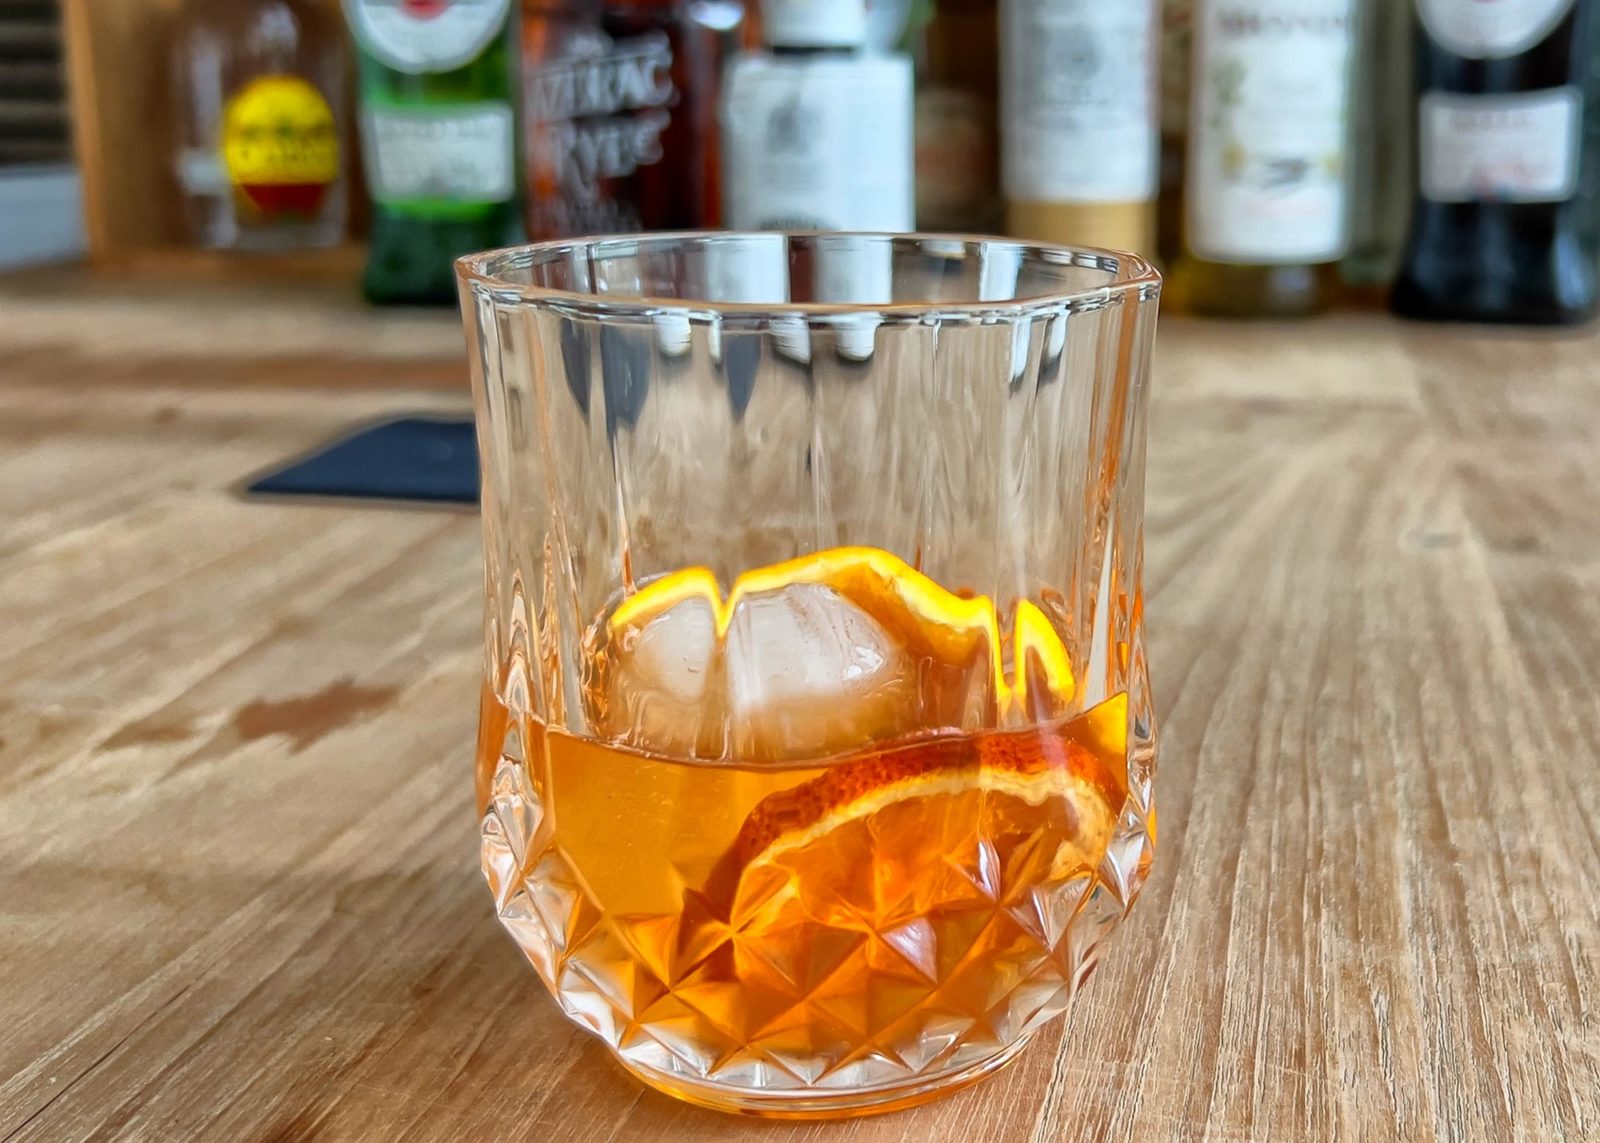 De Old Fashioned-cocktail met Rye whiskey